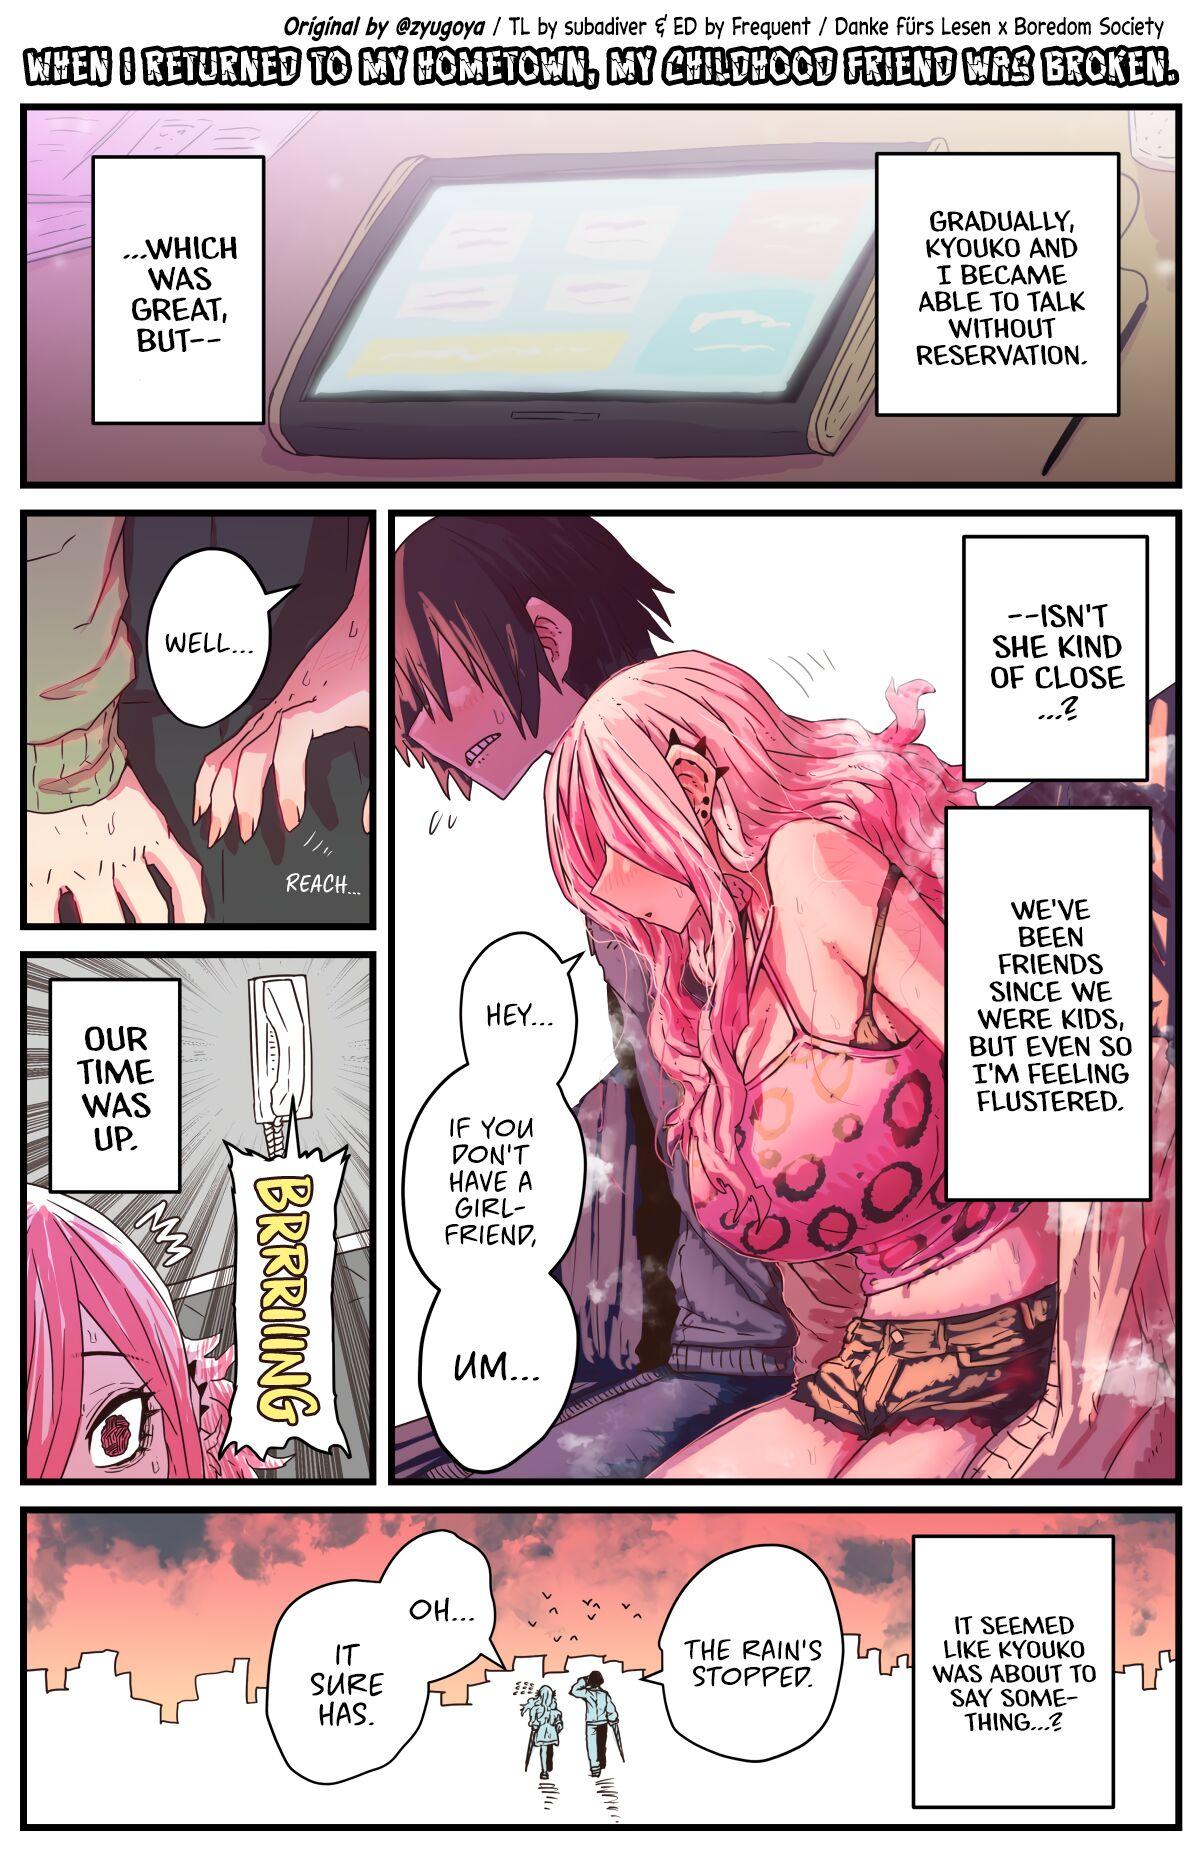 Indonesian When I Returned to My Hometown, My Childhood Friend was Broken - Original Cums - Page 10